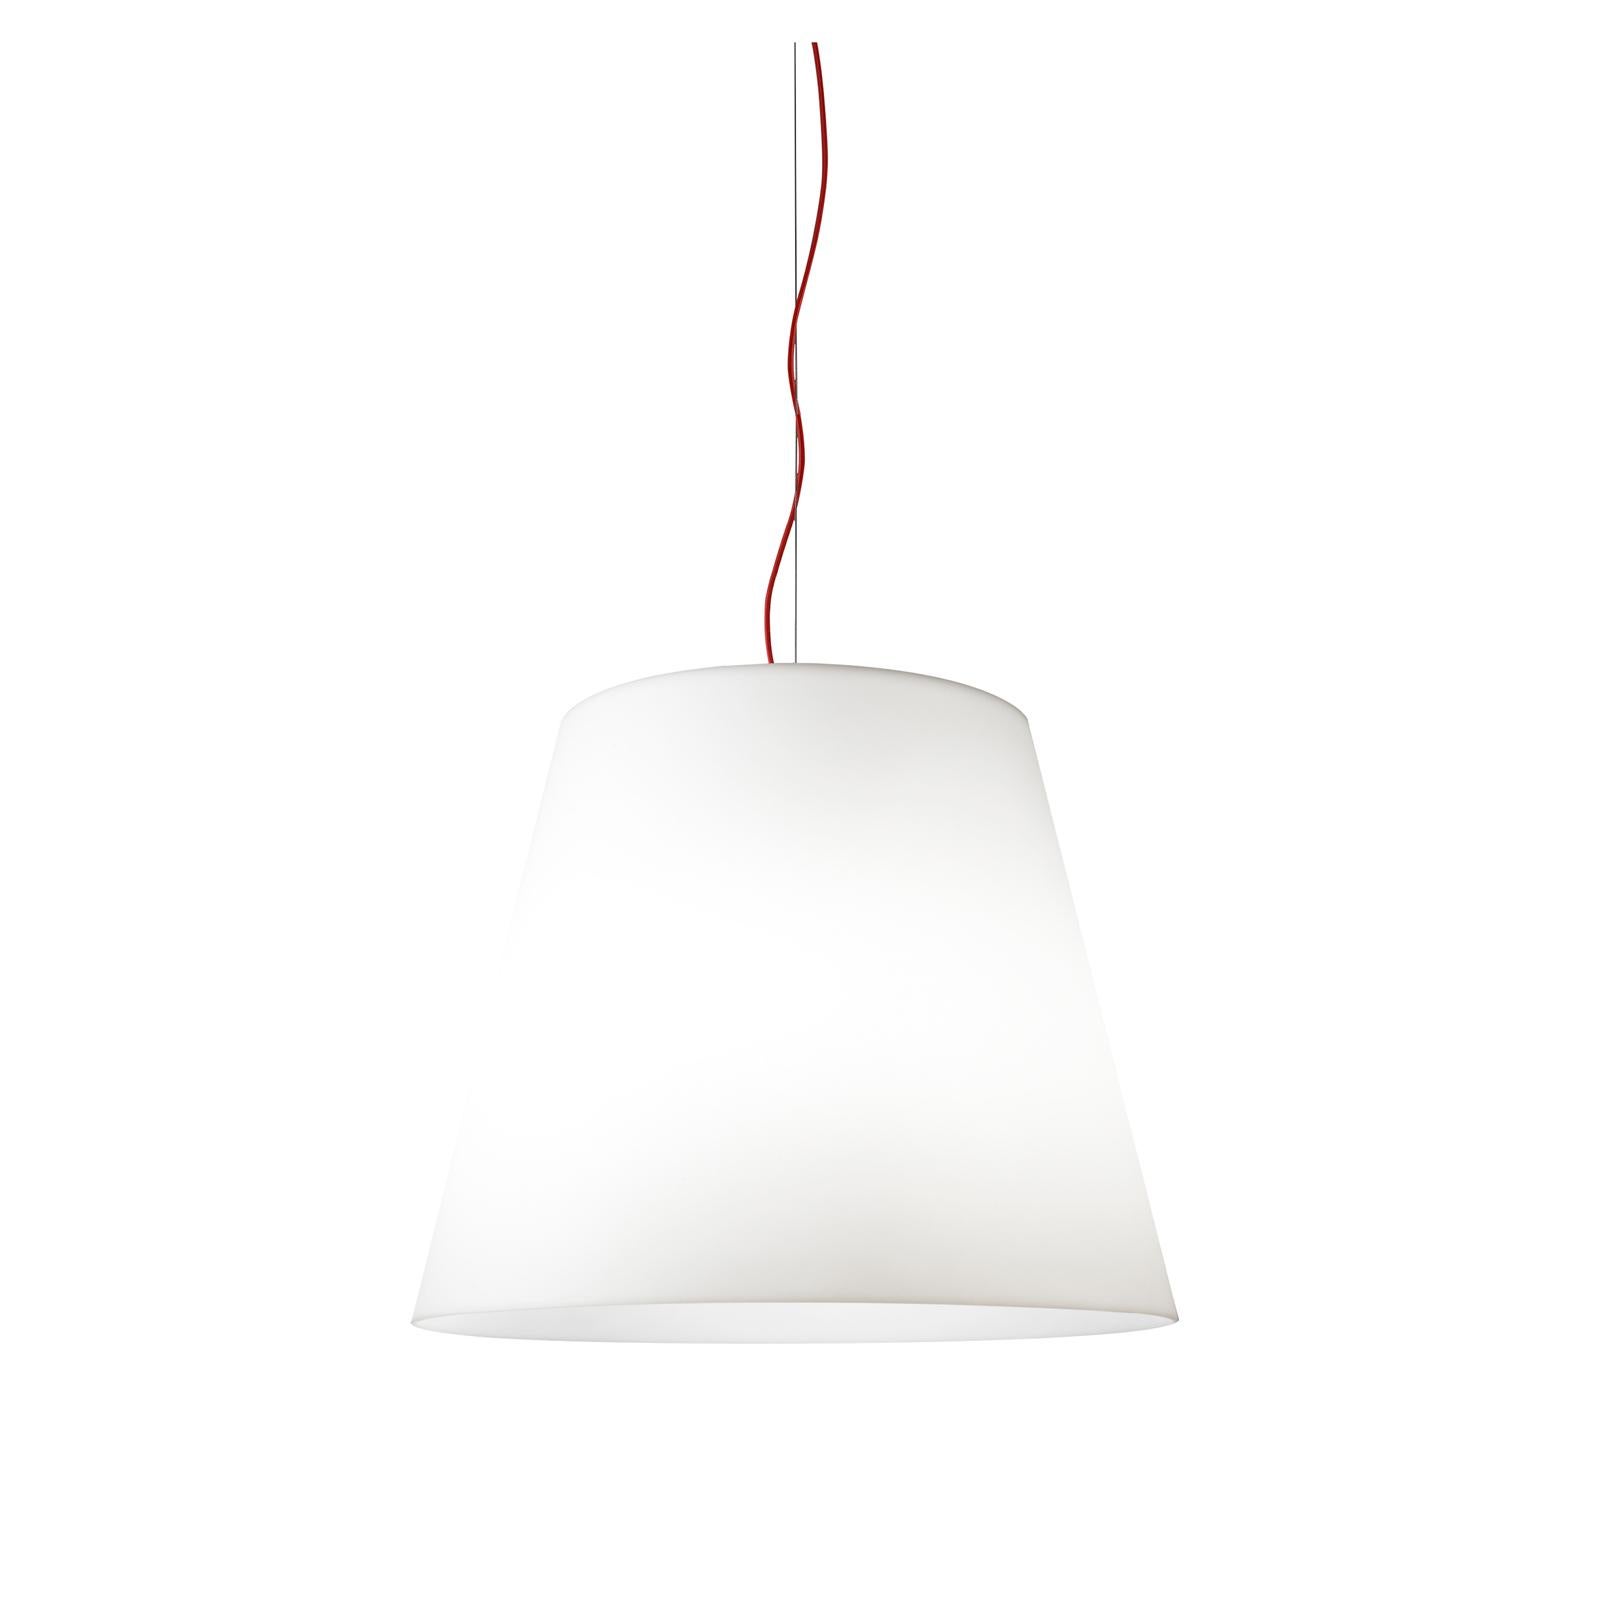 Charles Williams Fontana Arte Small Amax Suspension Lamp, 2003 In New Condition For Sale In Brooklyn, NY